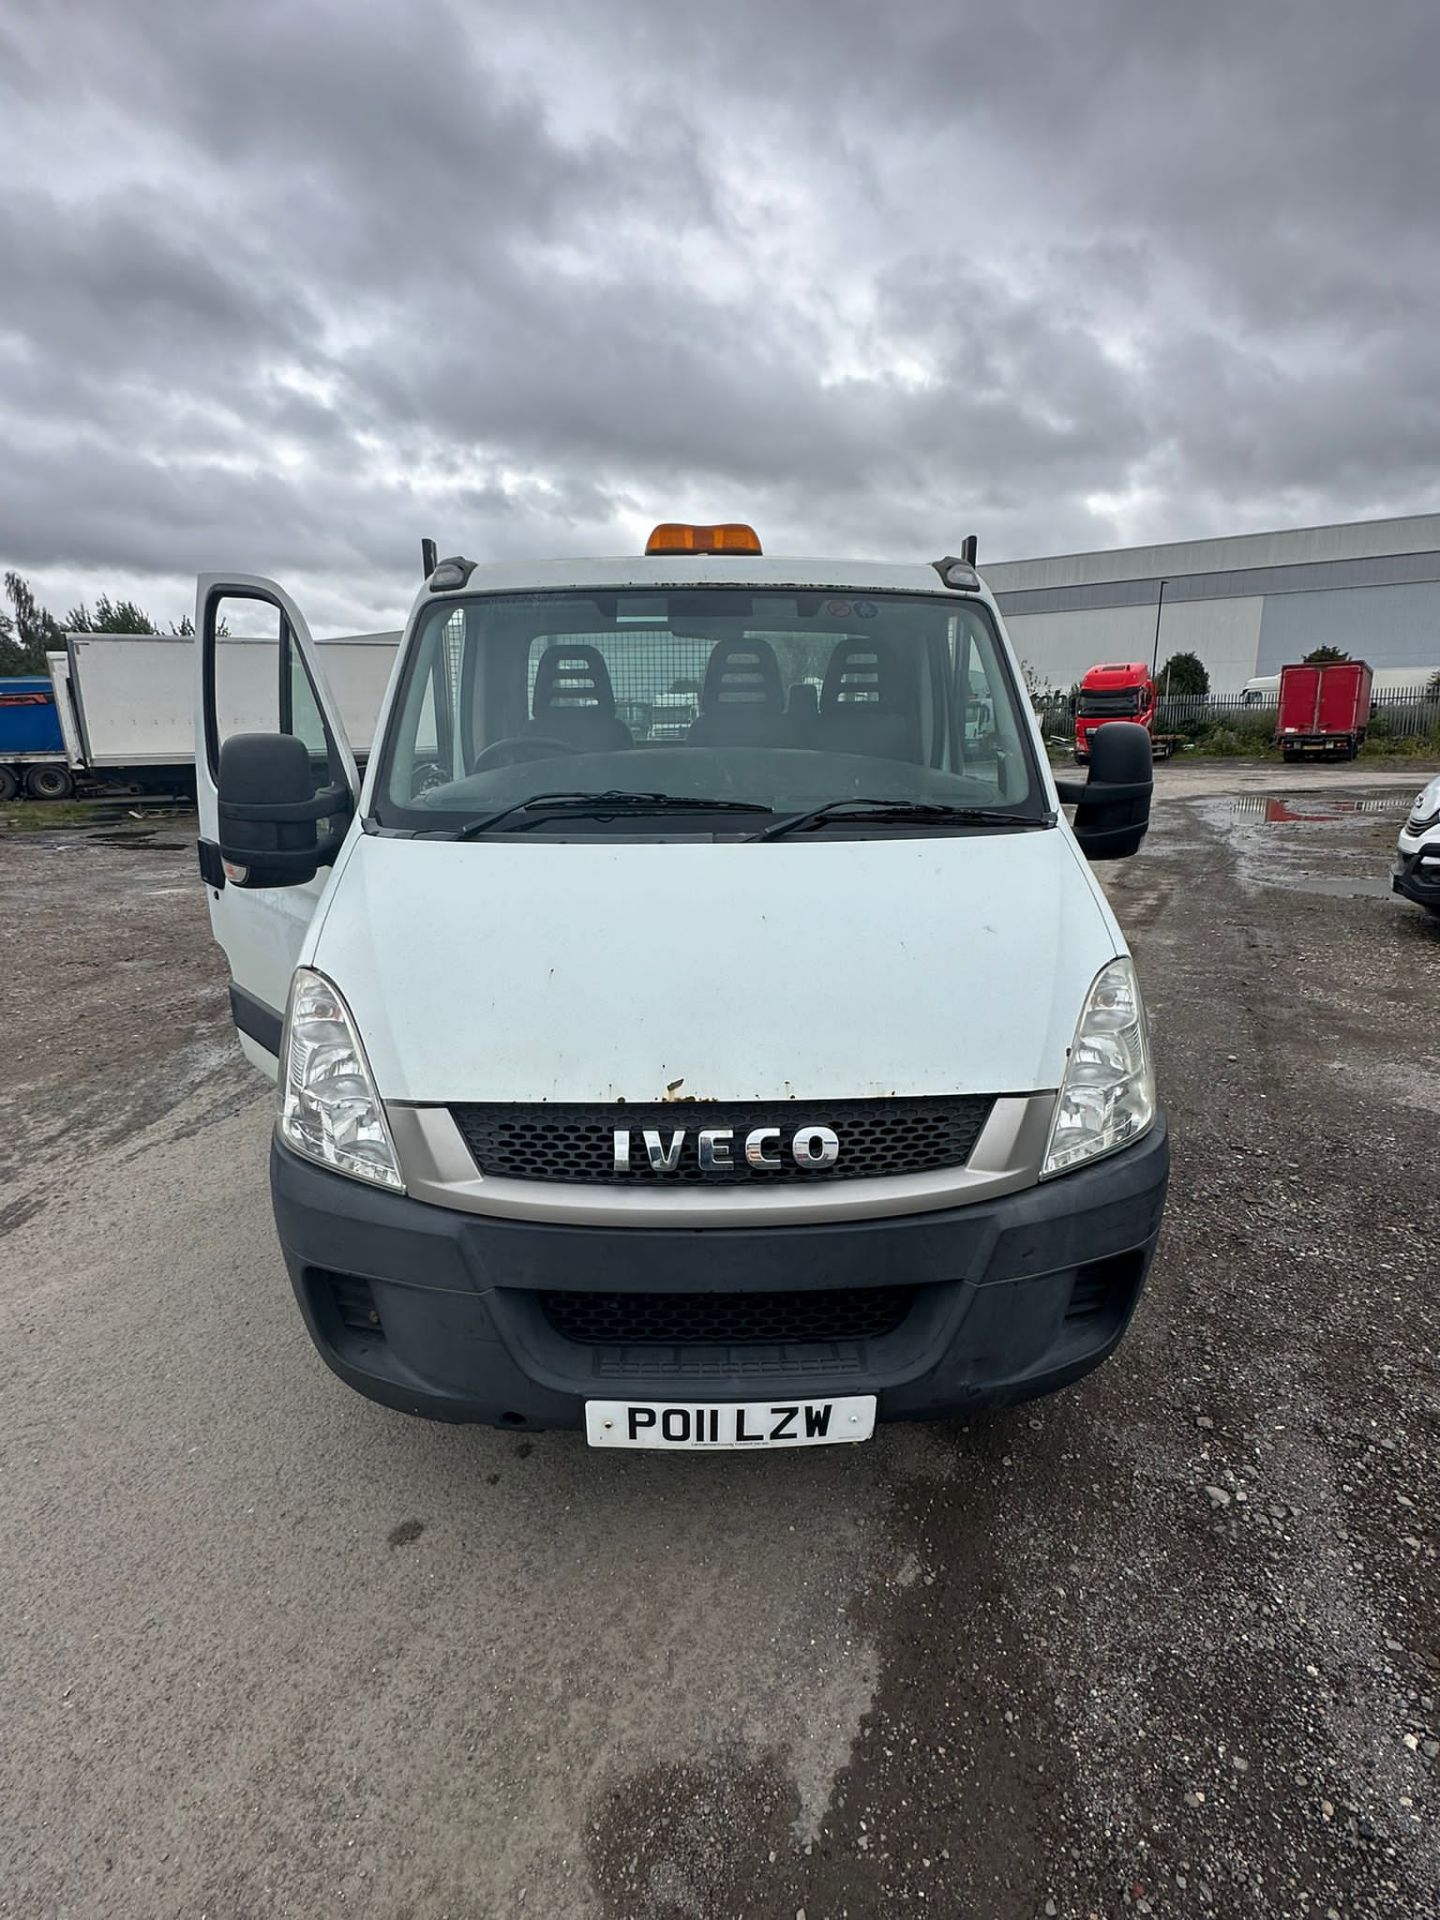 2011 11 IVECO DAILY TIPPER - 139K MILES - TWIN REAR WHEEL - EX COUNCIL TRUCK - Image 6 of 6